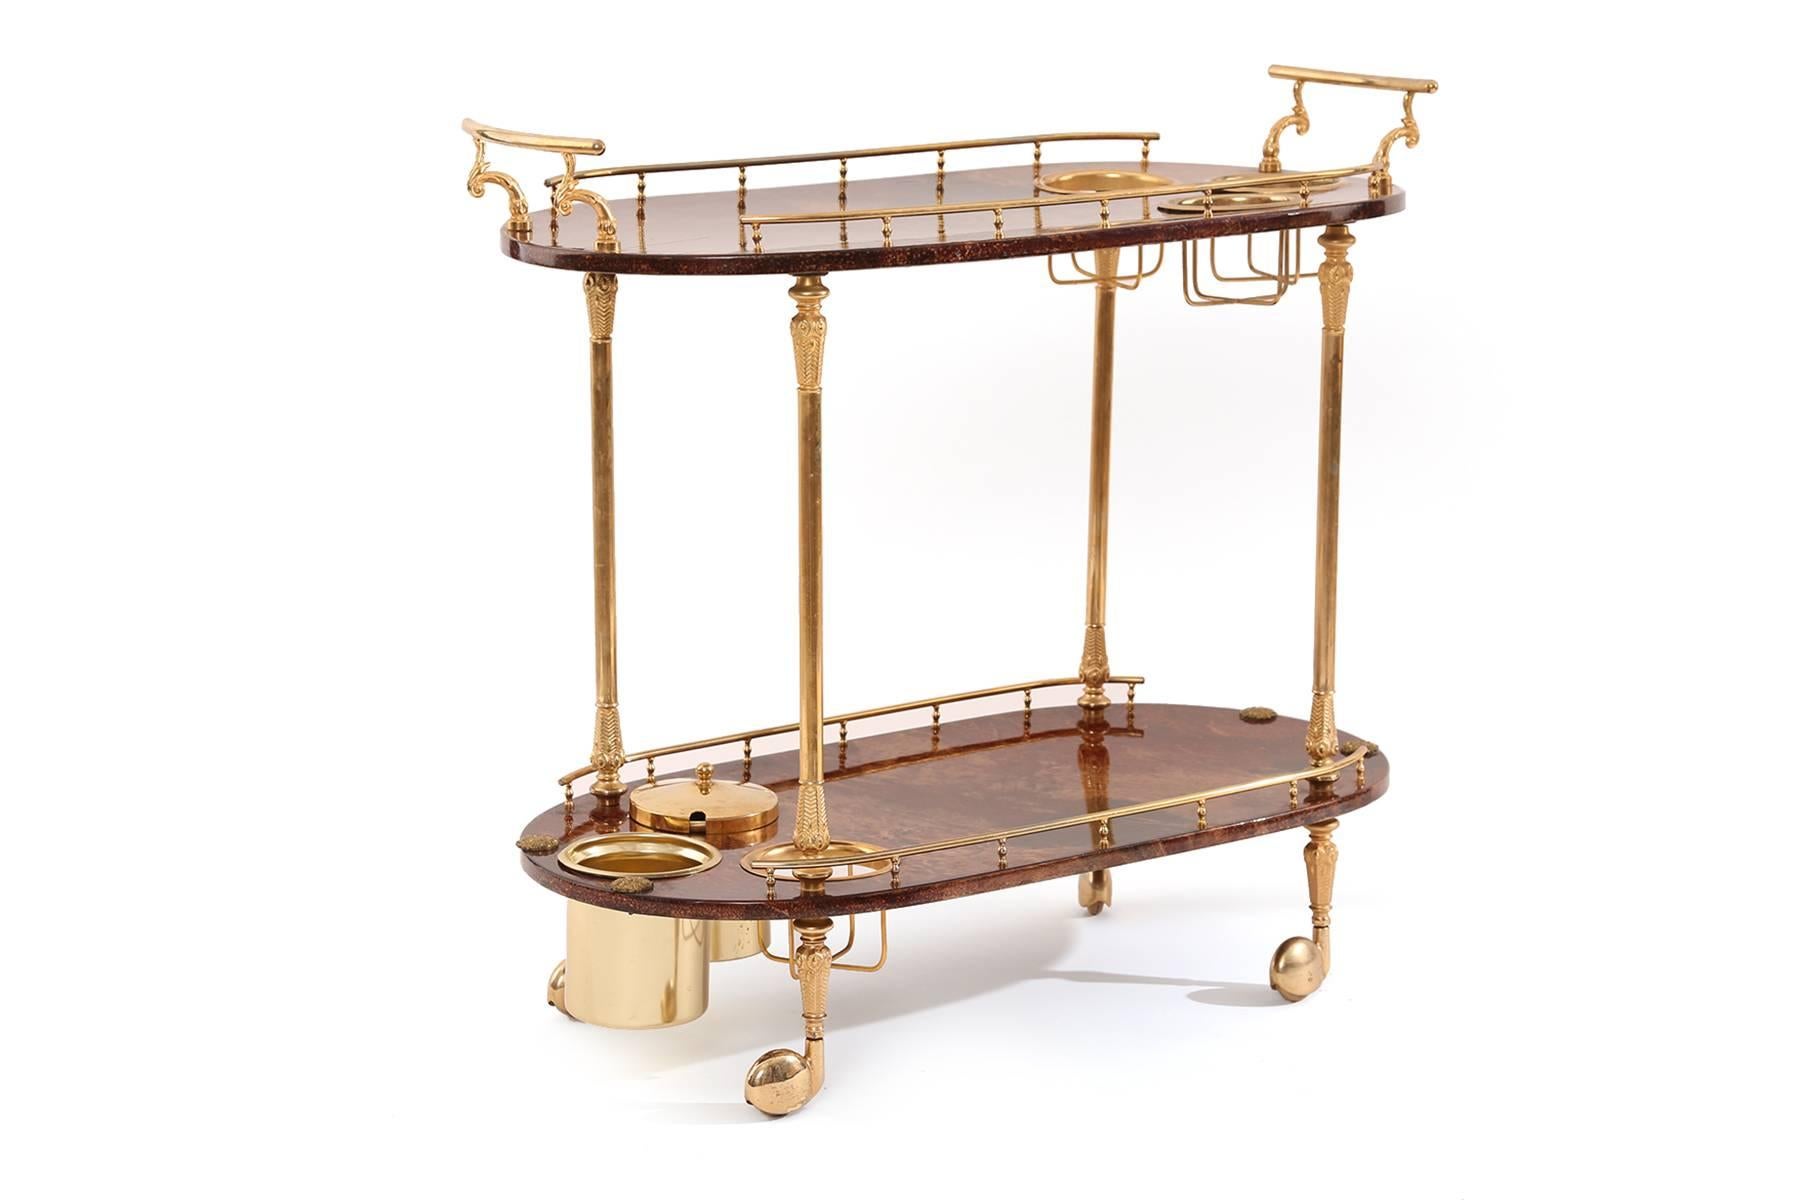 Pair of lacquered goatskin and brass bar carts by Aldo Tura, circa late 1950s. One of these examples has removable storage pieces and areas for bottles. Both have patinated brass detailing chocolate brown lacquer sealed goatskin surfaces and brass